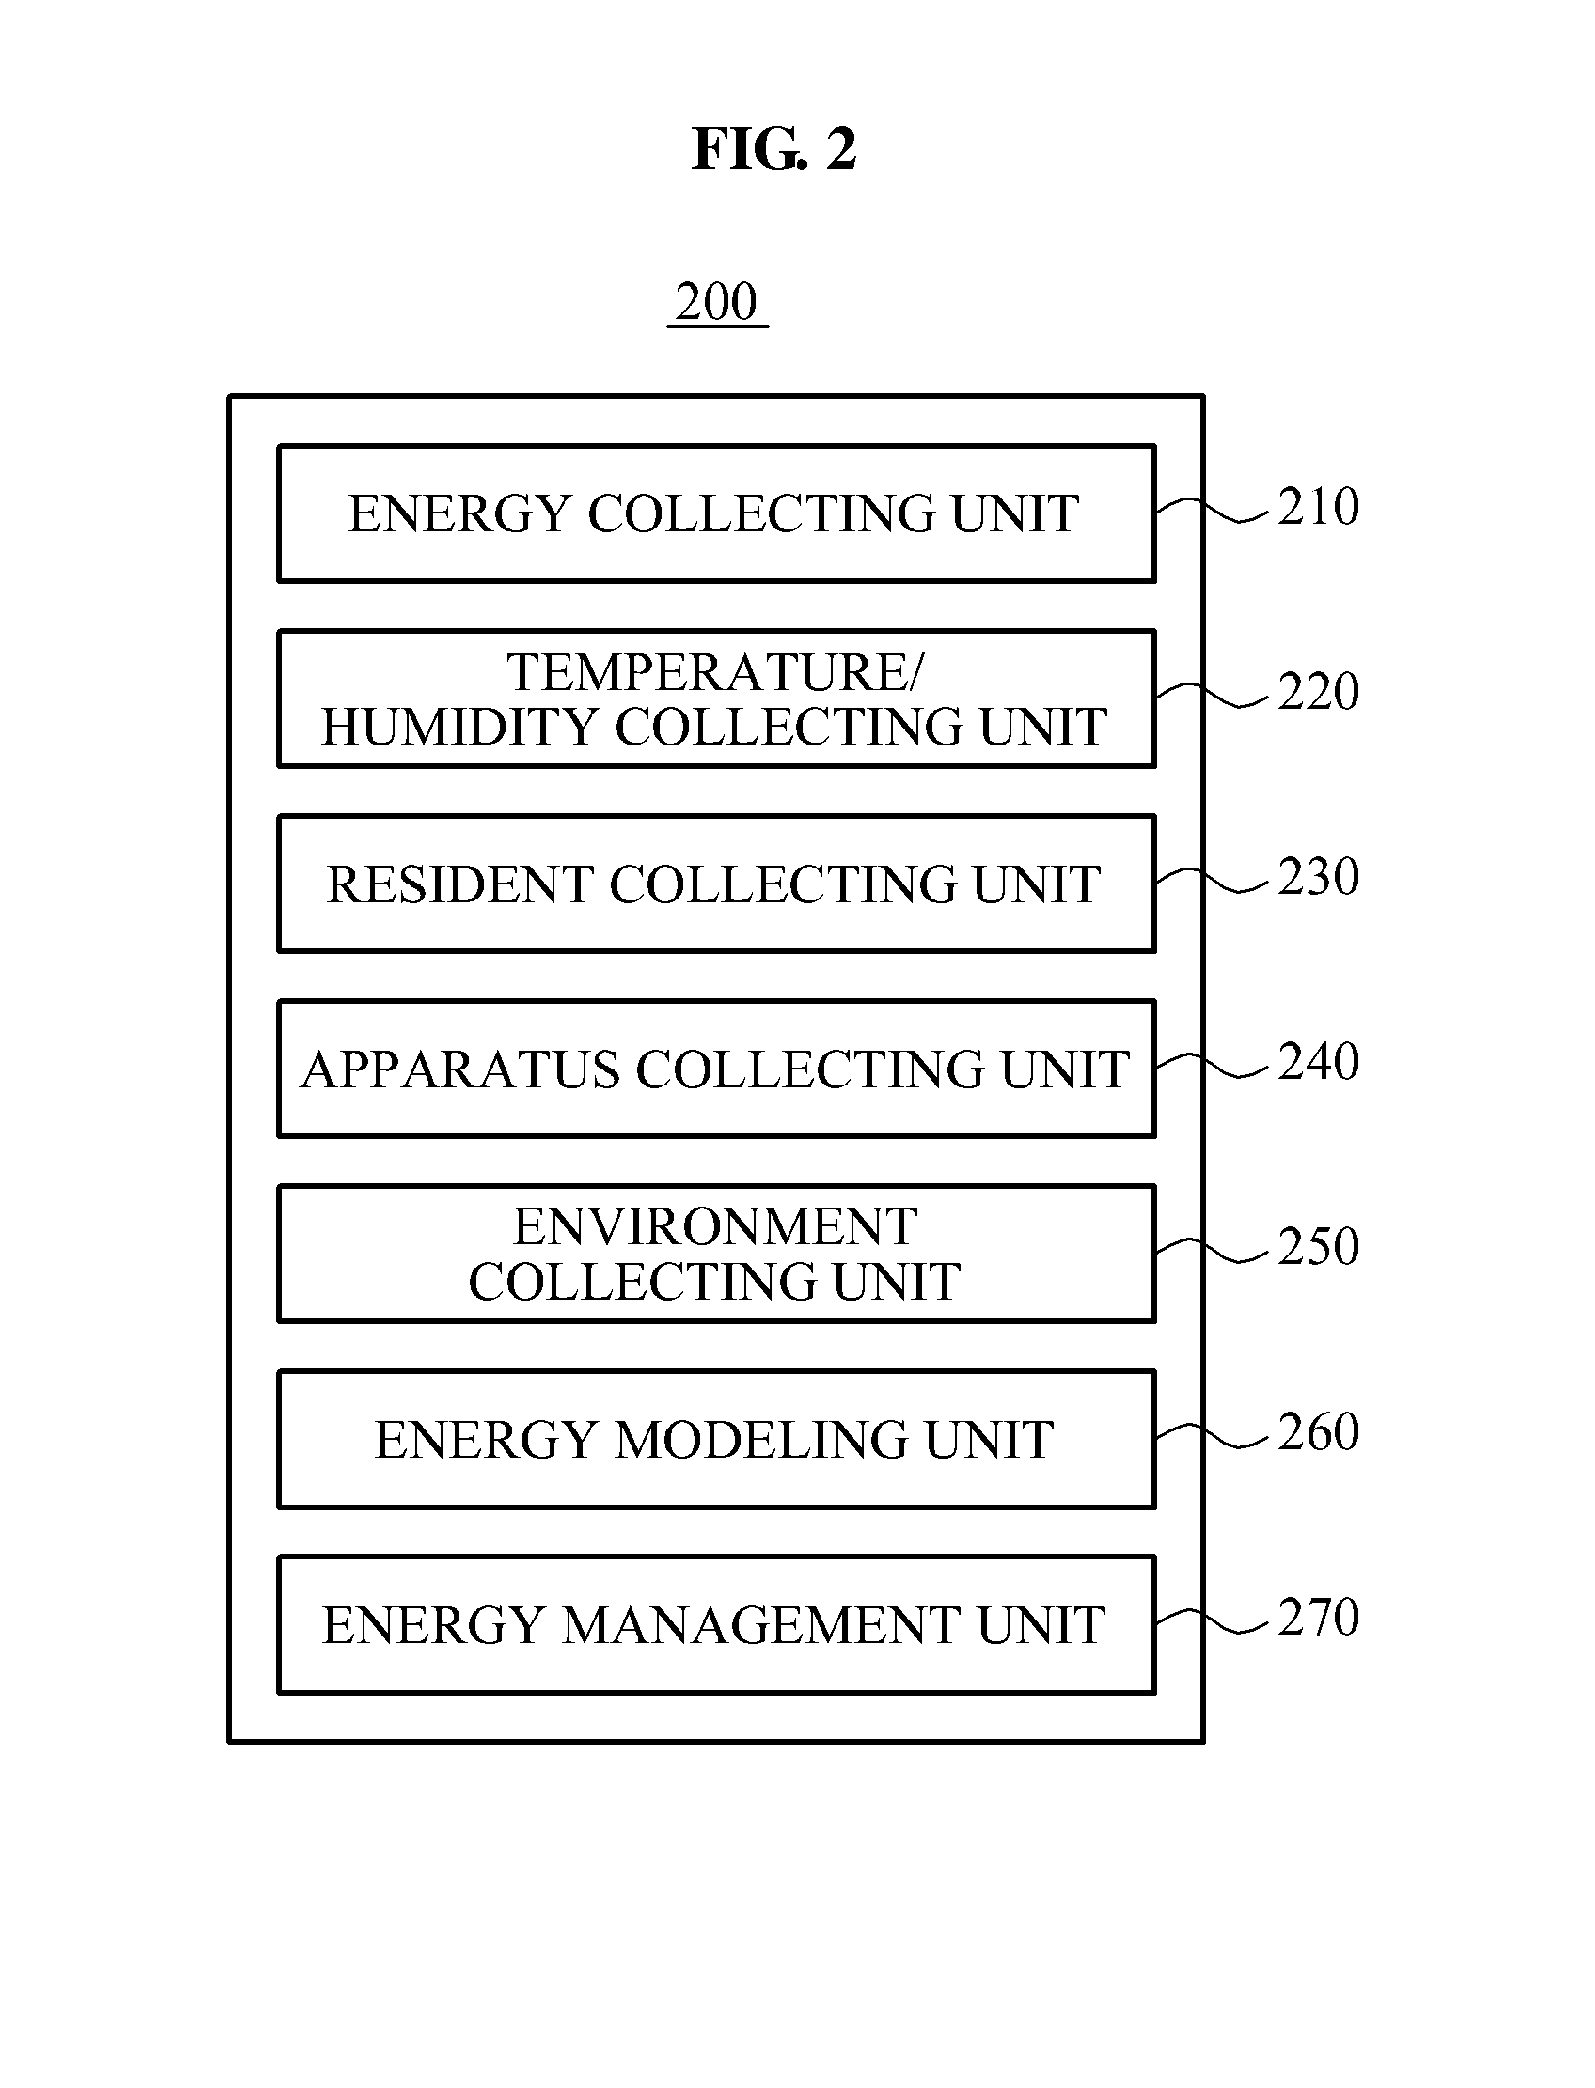 System and method for automatically controlling energy apparatus using energy modeling technique